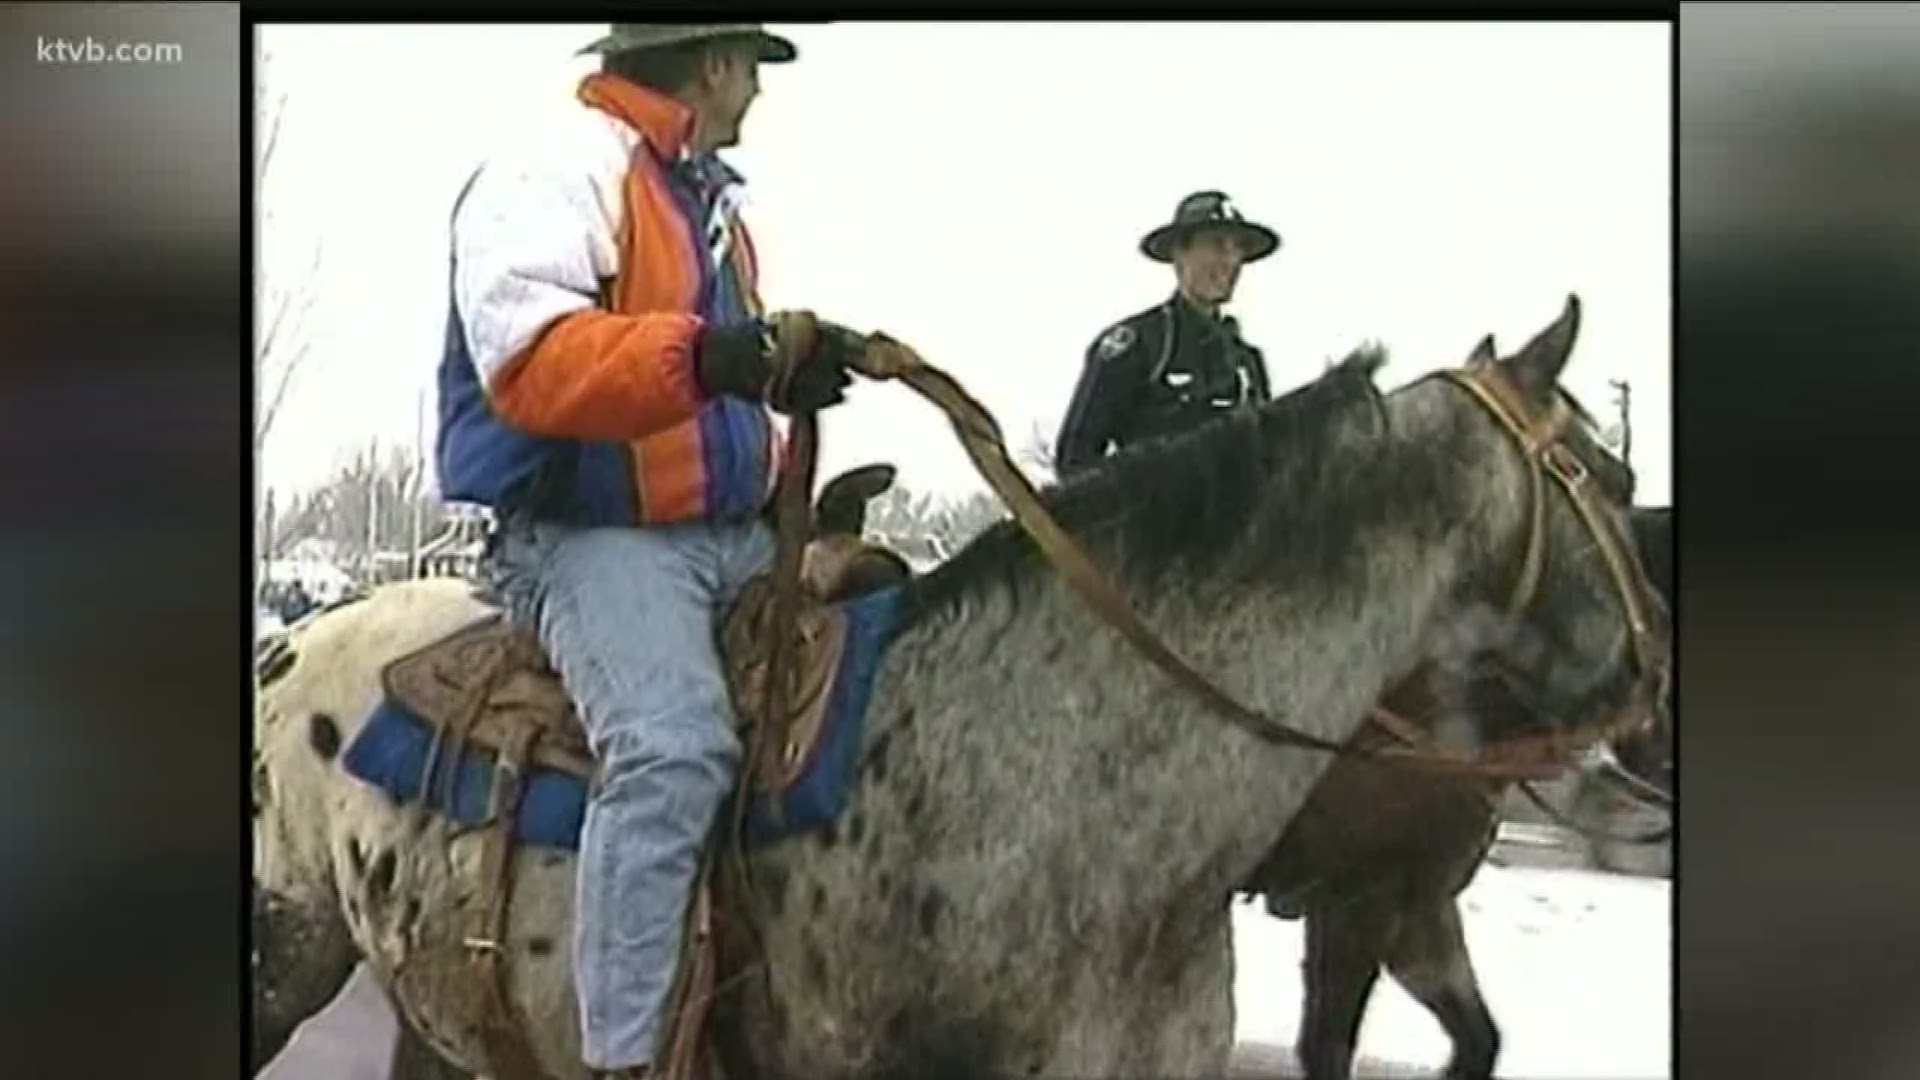 Allen vowed he would ride down Broadway Avenue on a horse if 20,000 fans showed up for the Broncos game vs. Marshall.